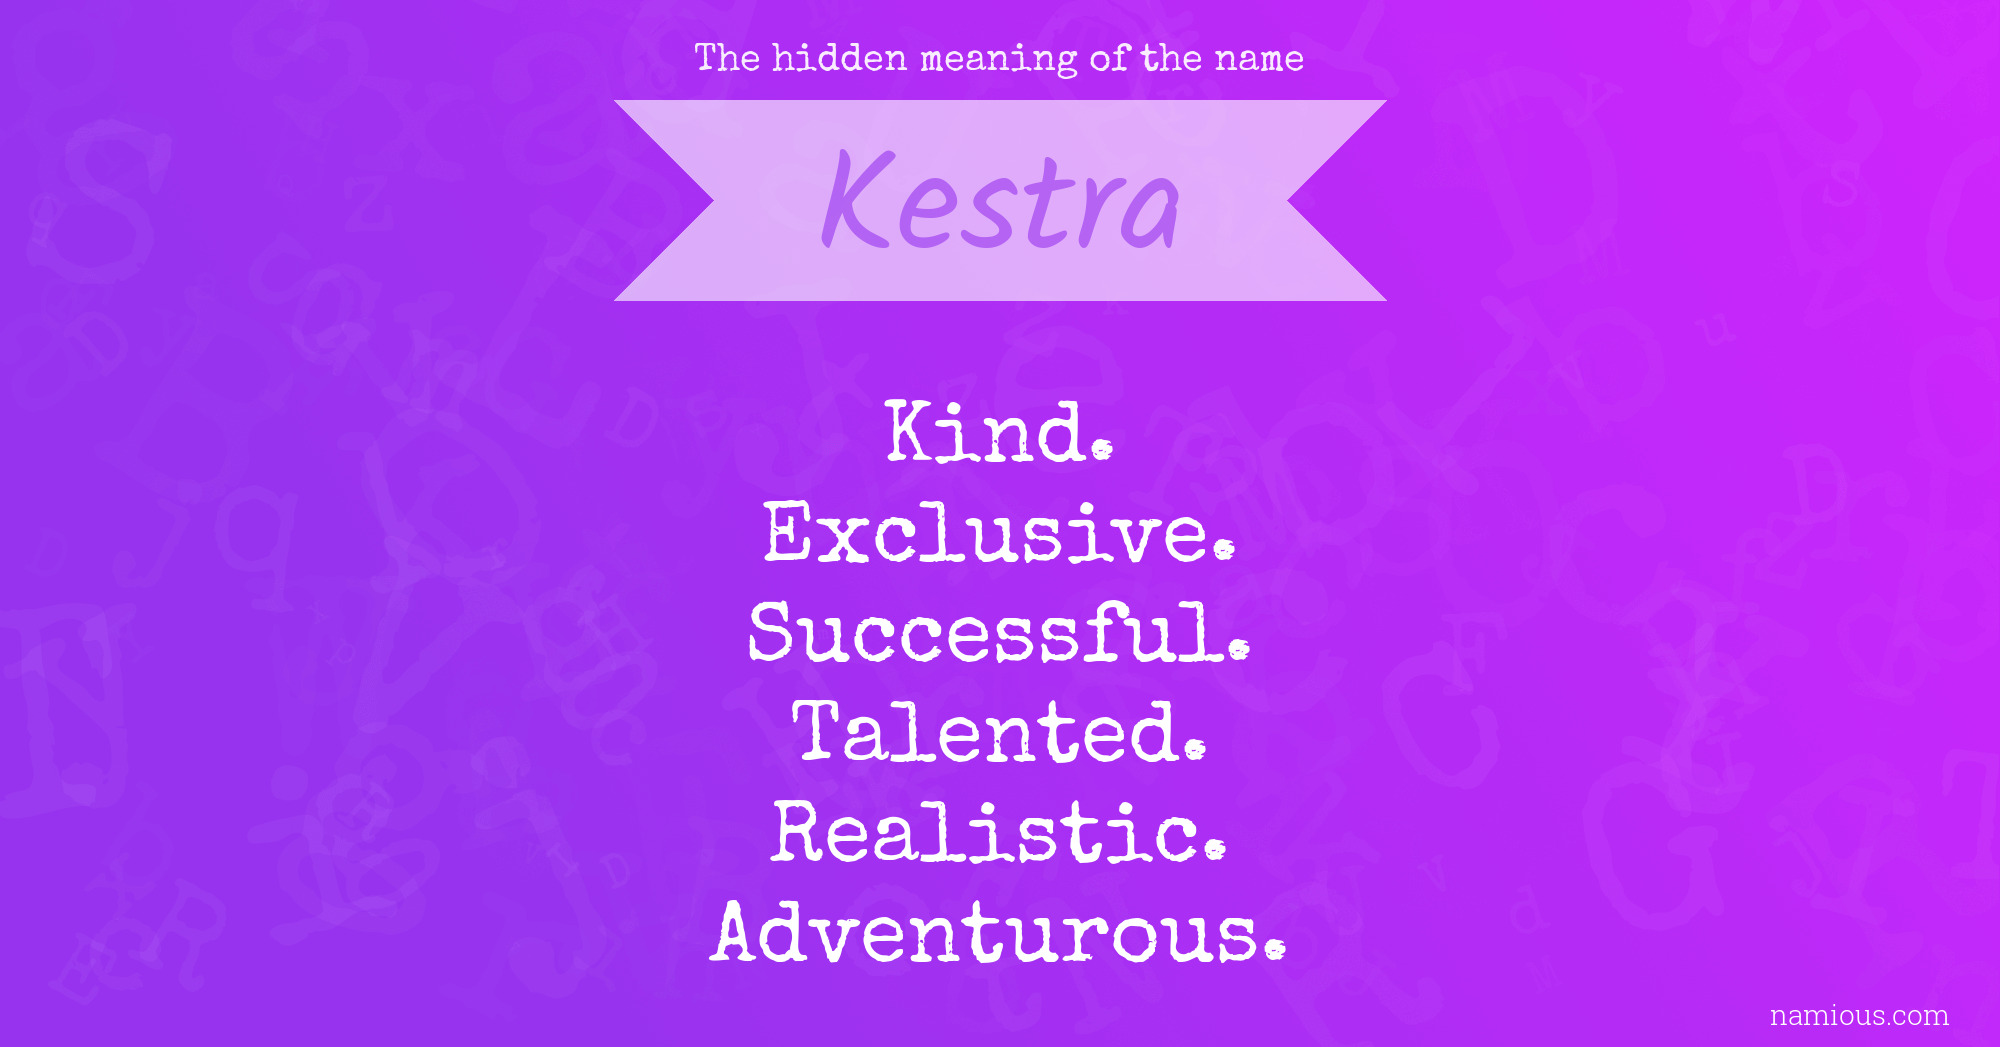 The hidden meaning of the name Kestra